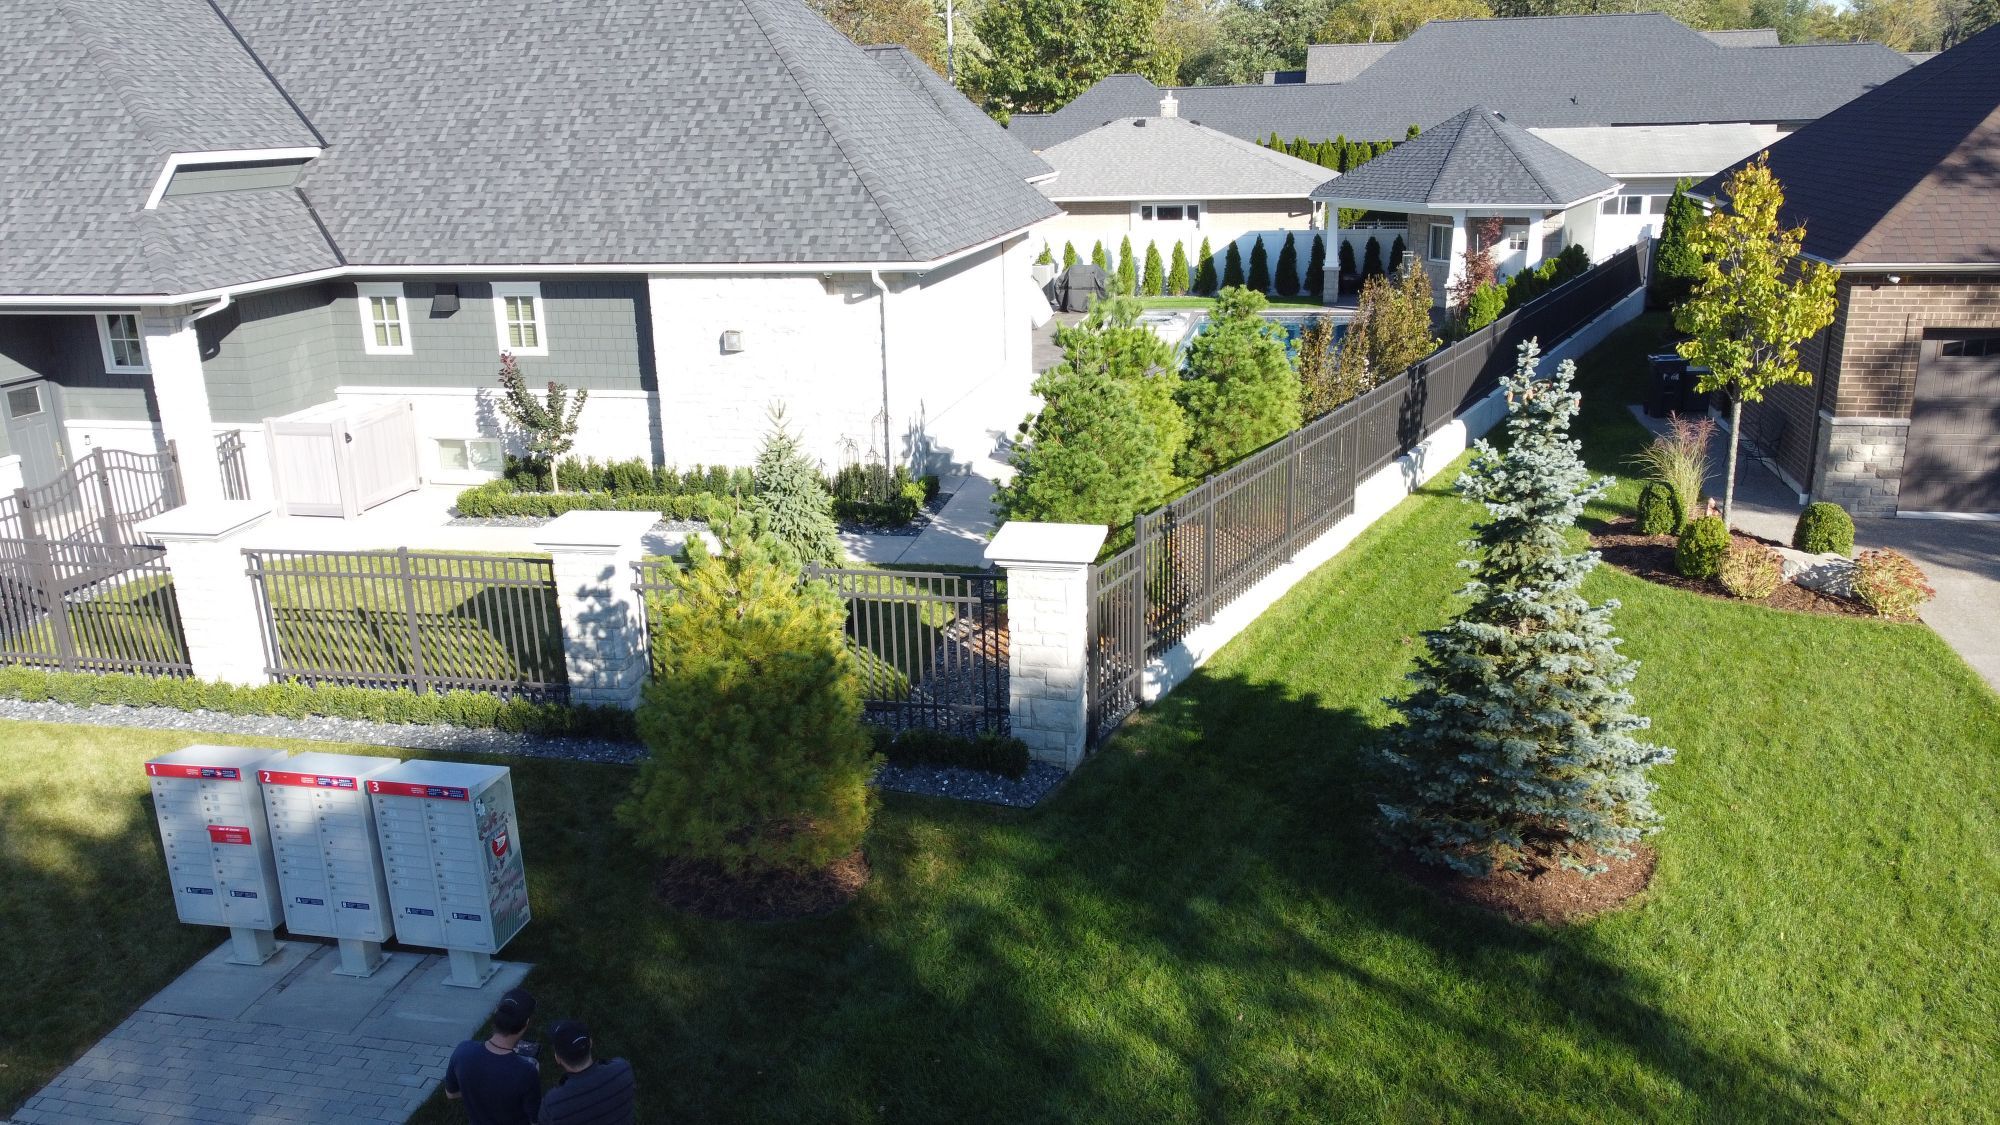 In Tecumseh, Ontario, we installed this industrial fencing around a pool. In coordination with Erie Accent pools, this metal fence makes a bold statement with stone pillars. It perfectly comes together.